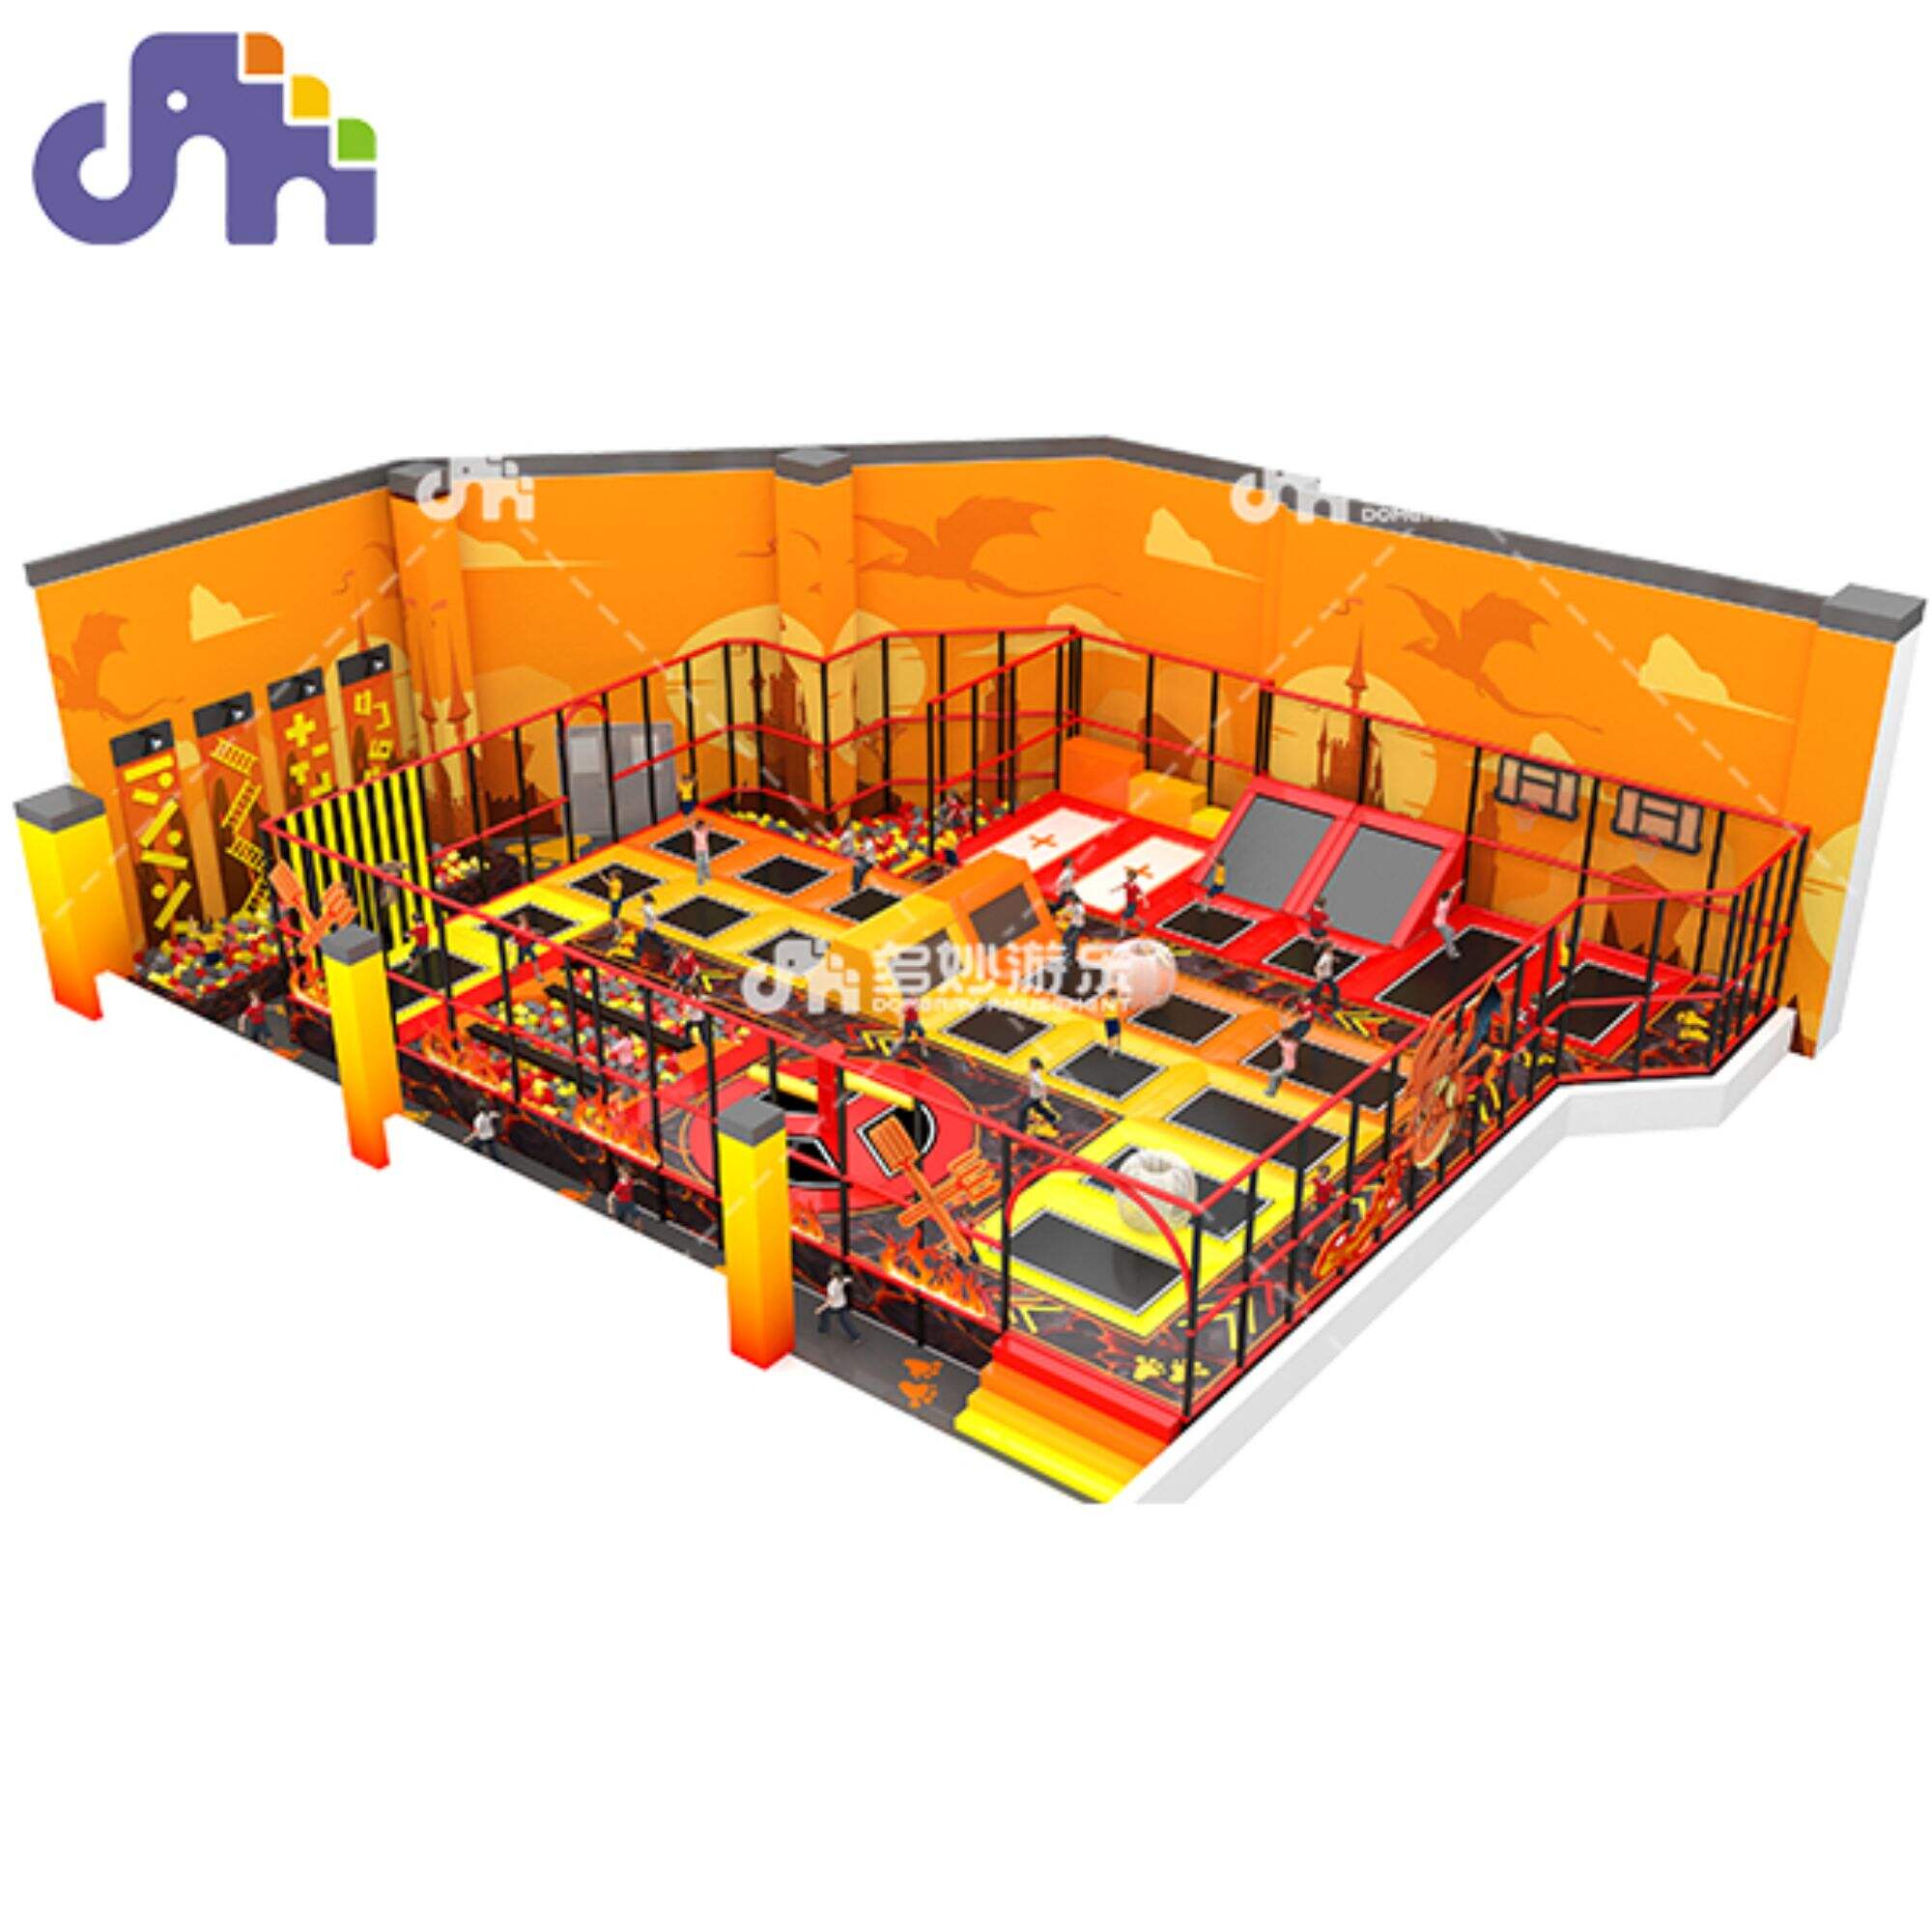 Kids Indoor Playground Trampoline Jumping Bed for Trampoline Park Essential Equipment for Fun and Active Play